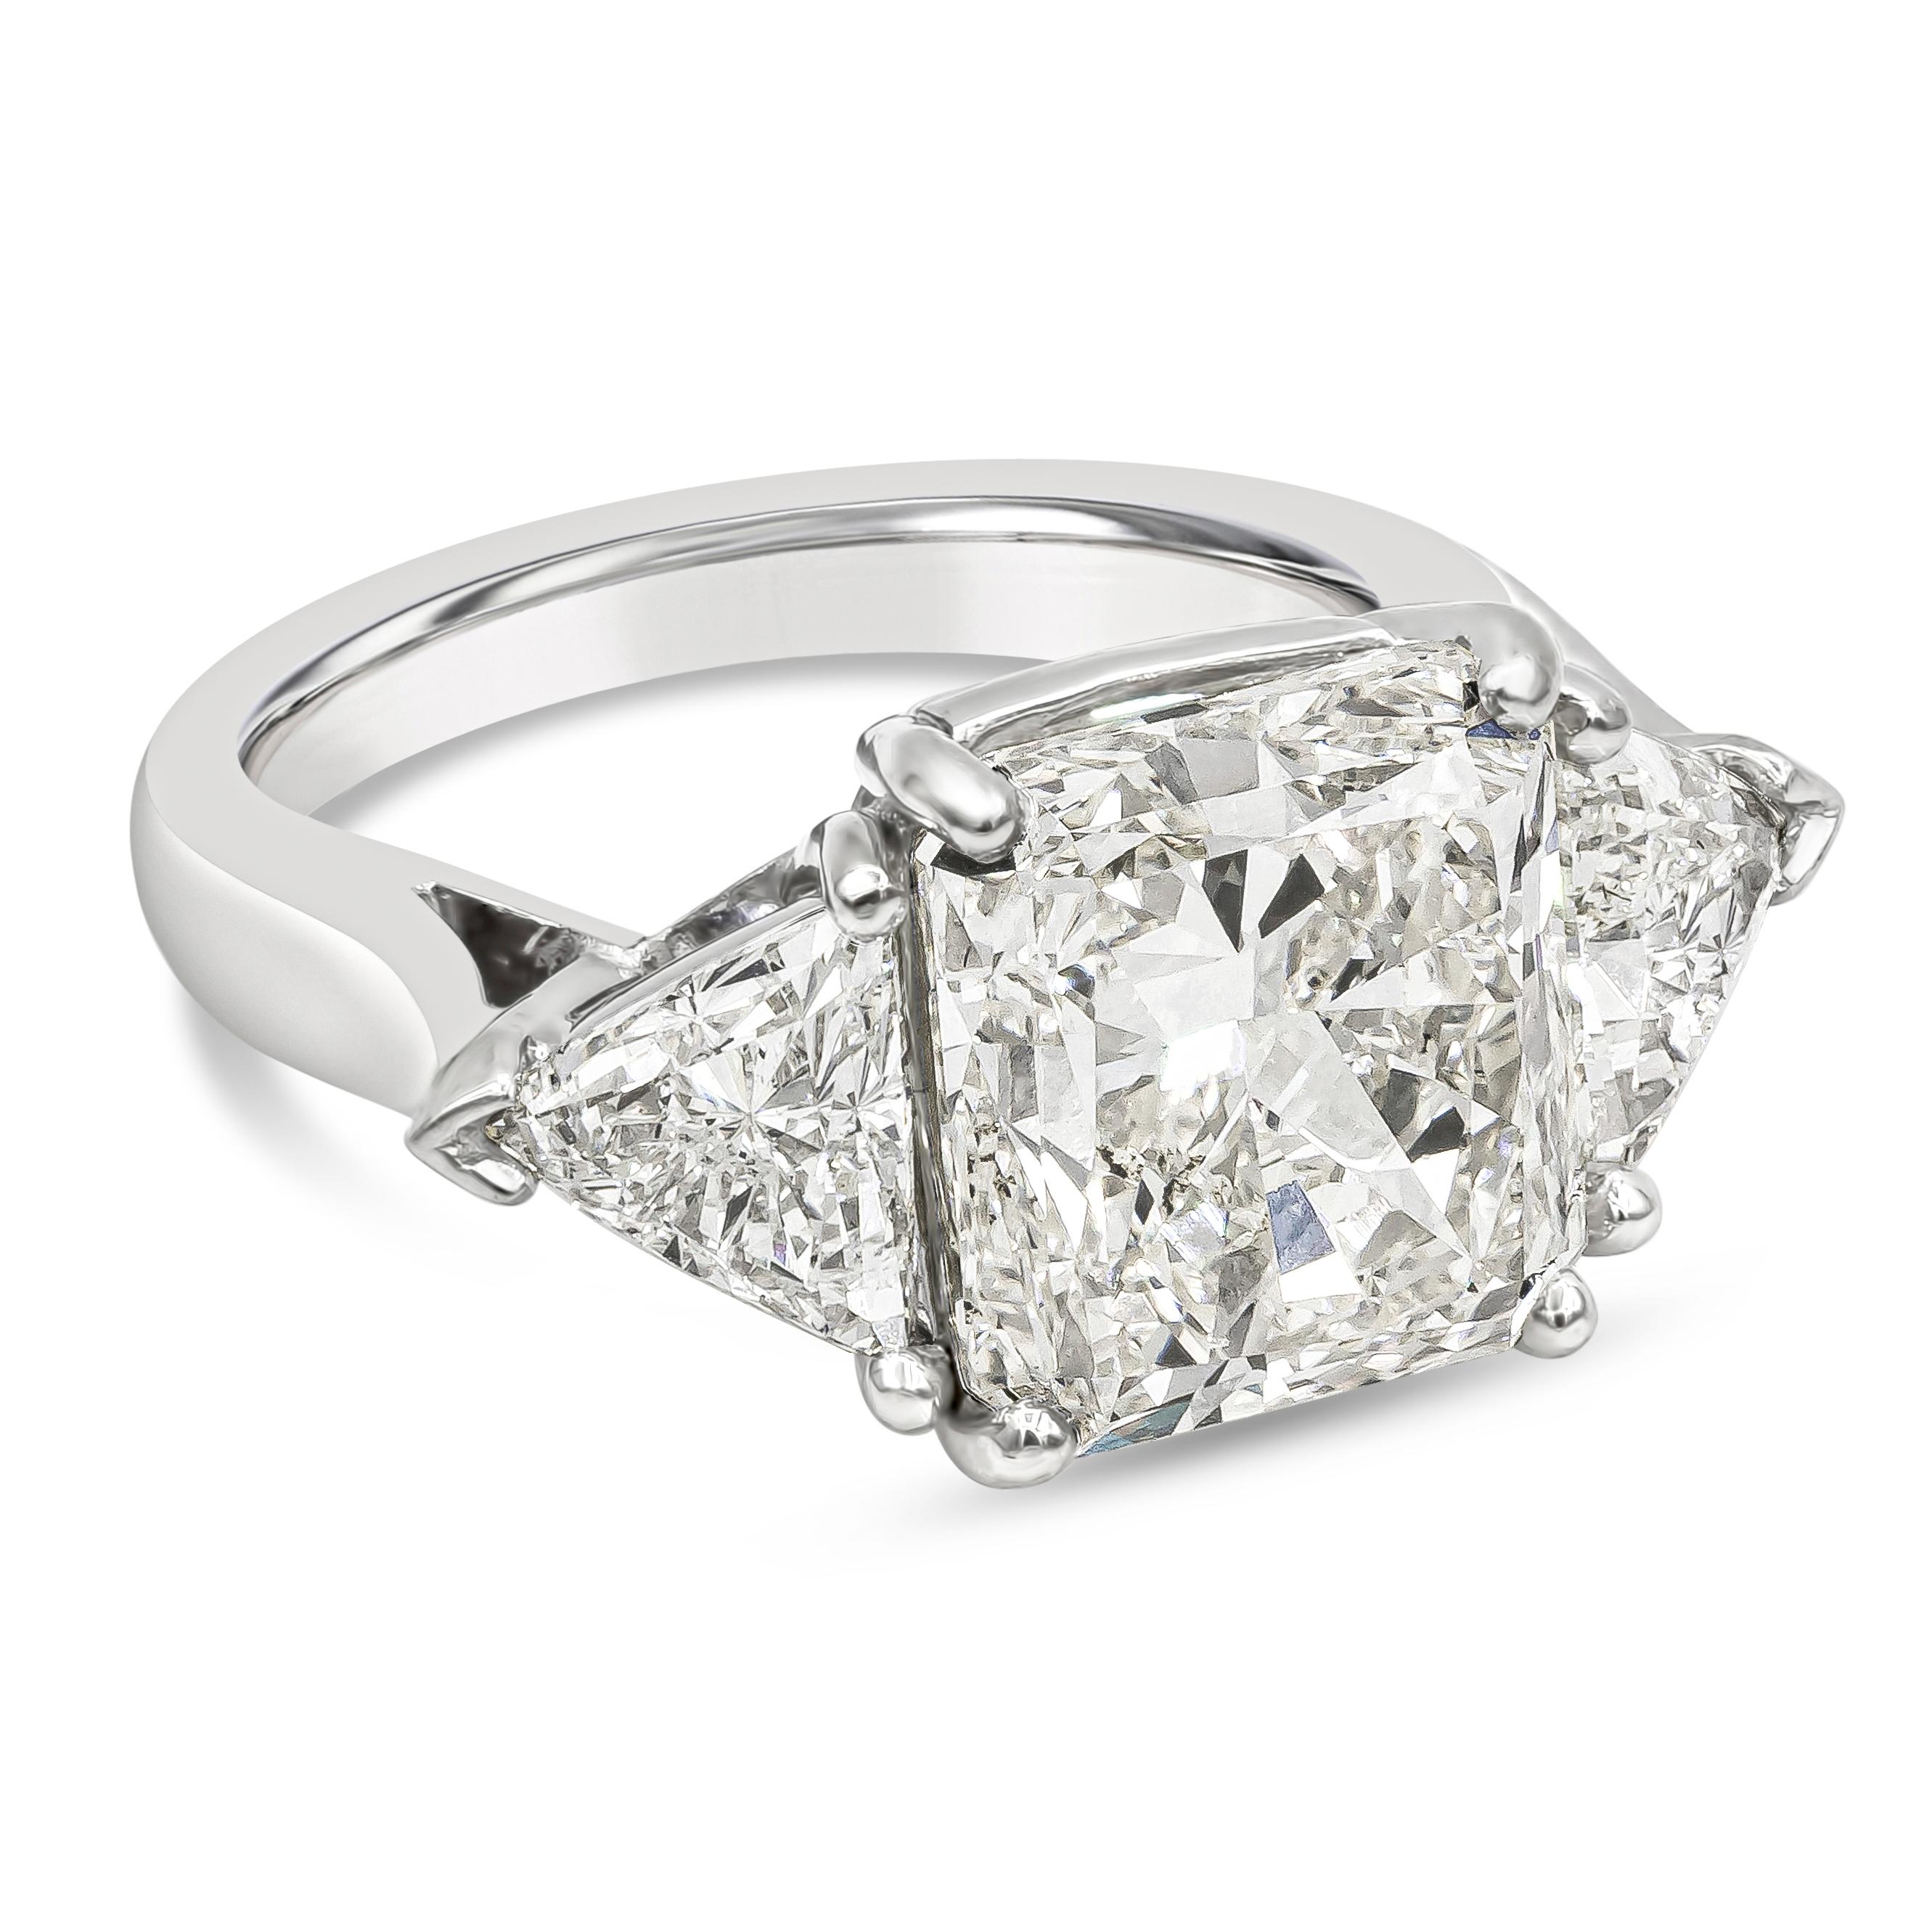 Elegantly made three stone engagement ring features a 6.90 carats radiant cut diamond certified by GIA as L color, SI1 in clarity, set in platinum four prong setting. Flanked by brilliant trillion cut diamonds on either side, weighing 1.50 carats